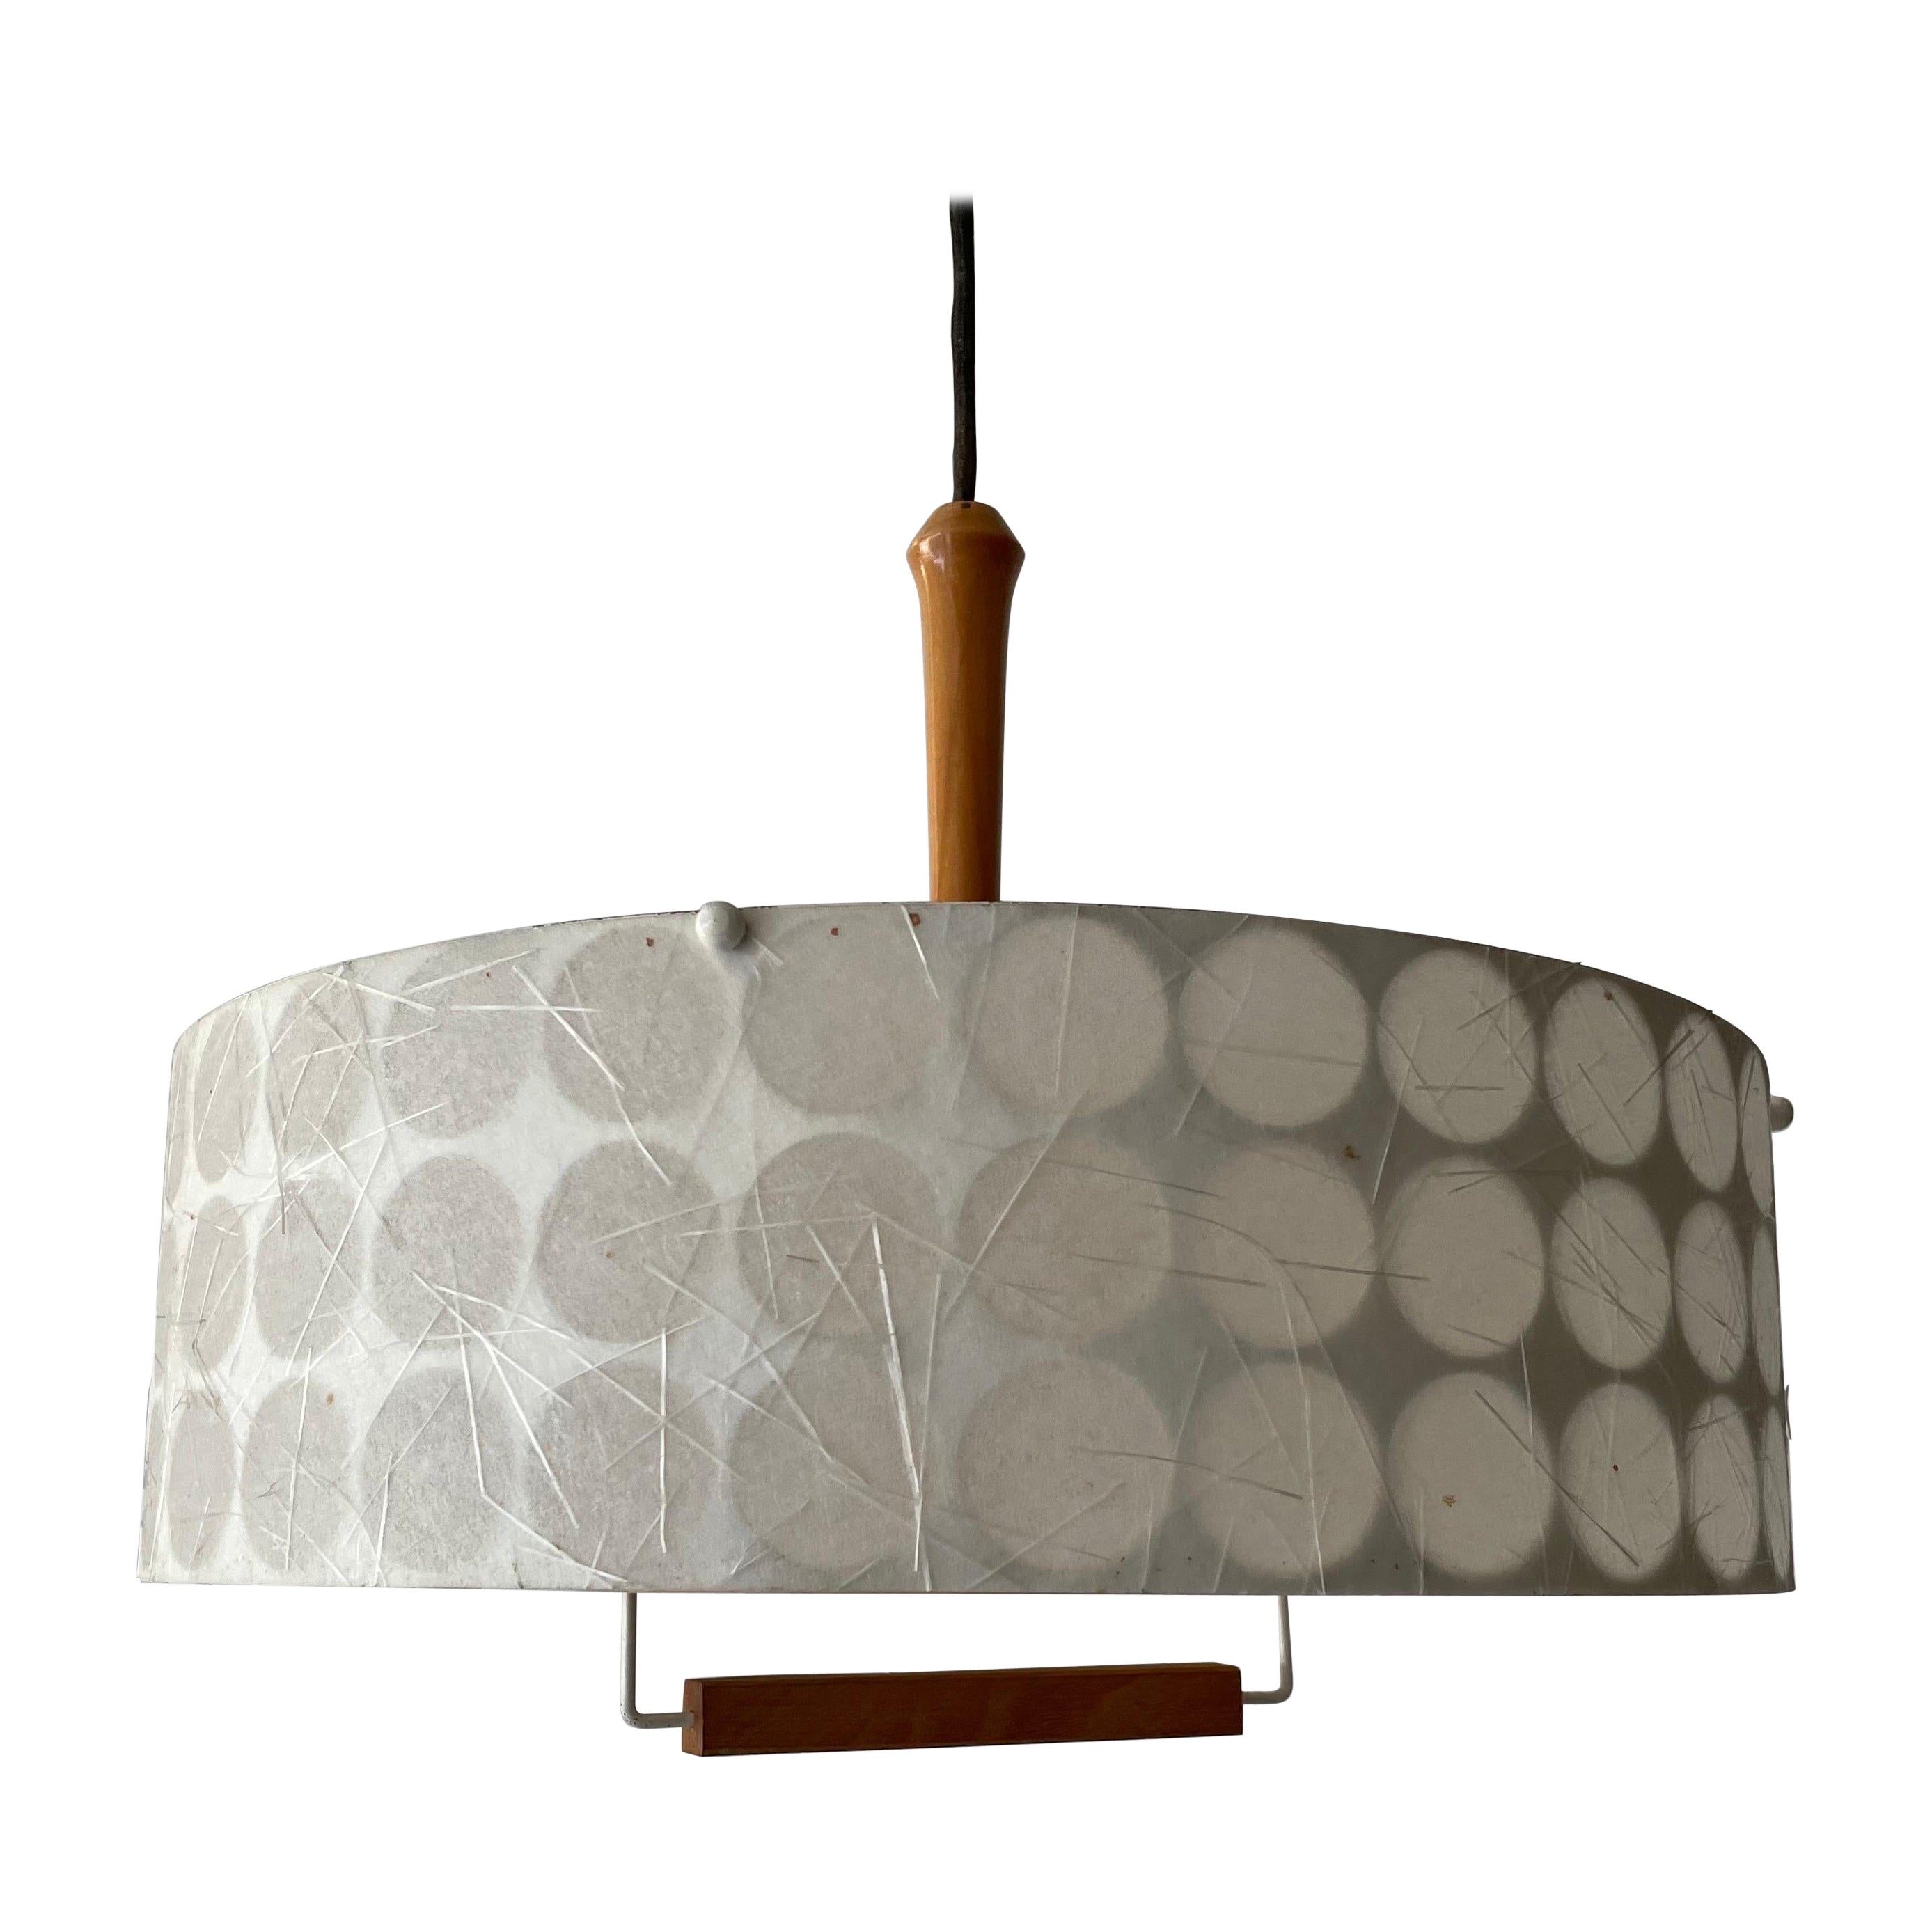 Rare Atomic Shade Pendant Lamp by Temde, 1960s, Switzerland For Sale